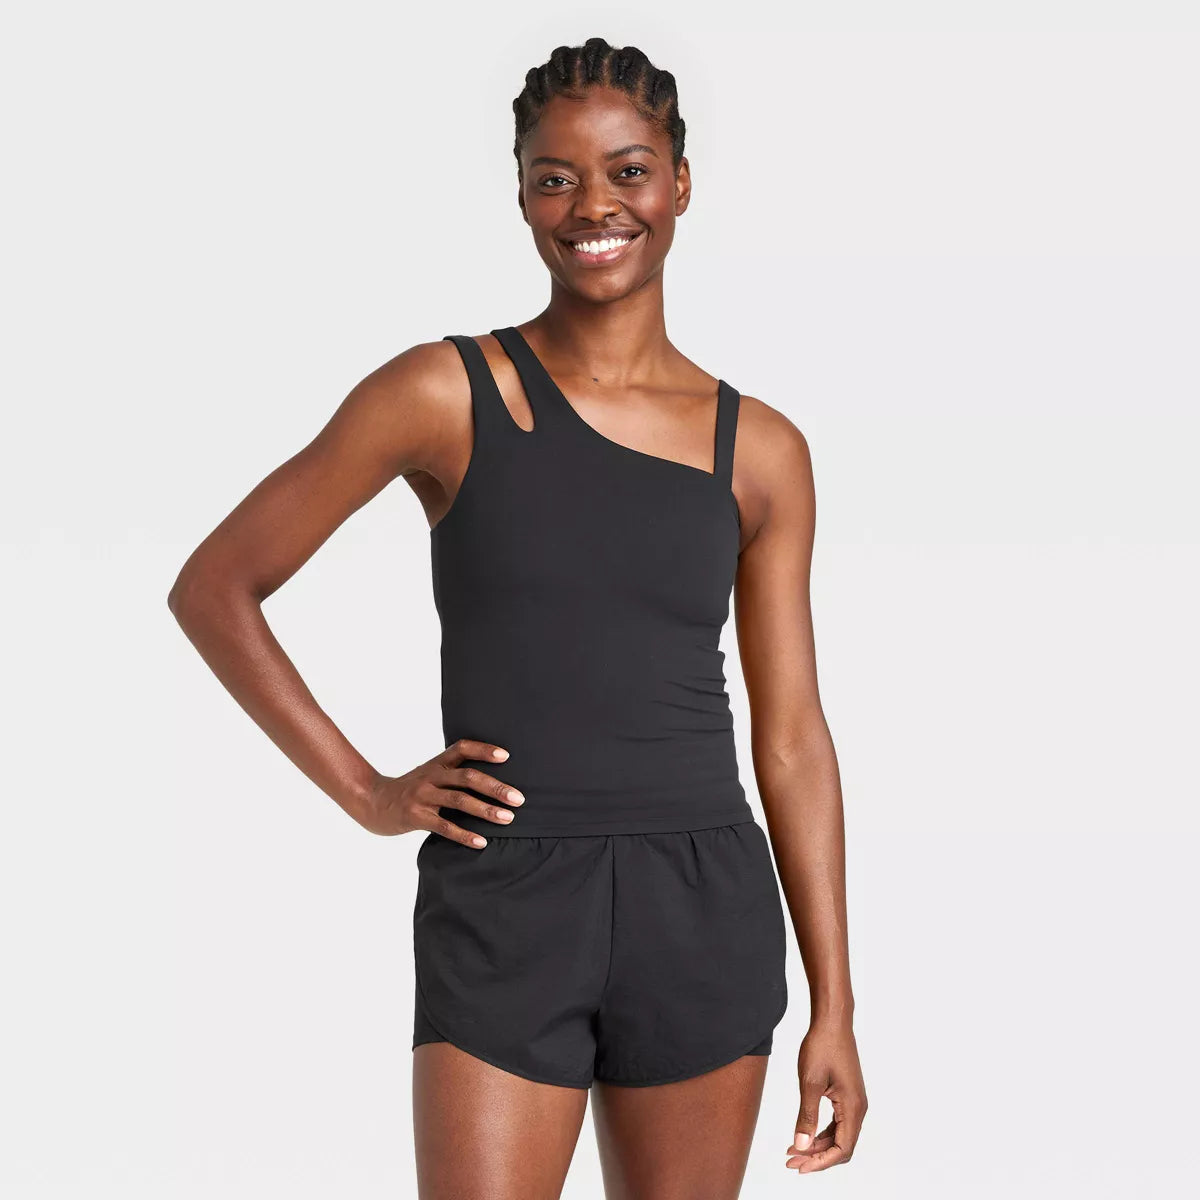 TARGET: Women's Everyday Soft Tank Top - All in Motion™